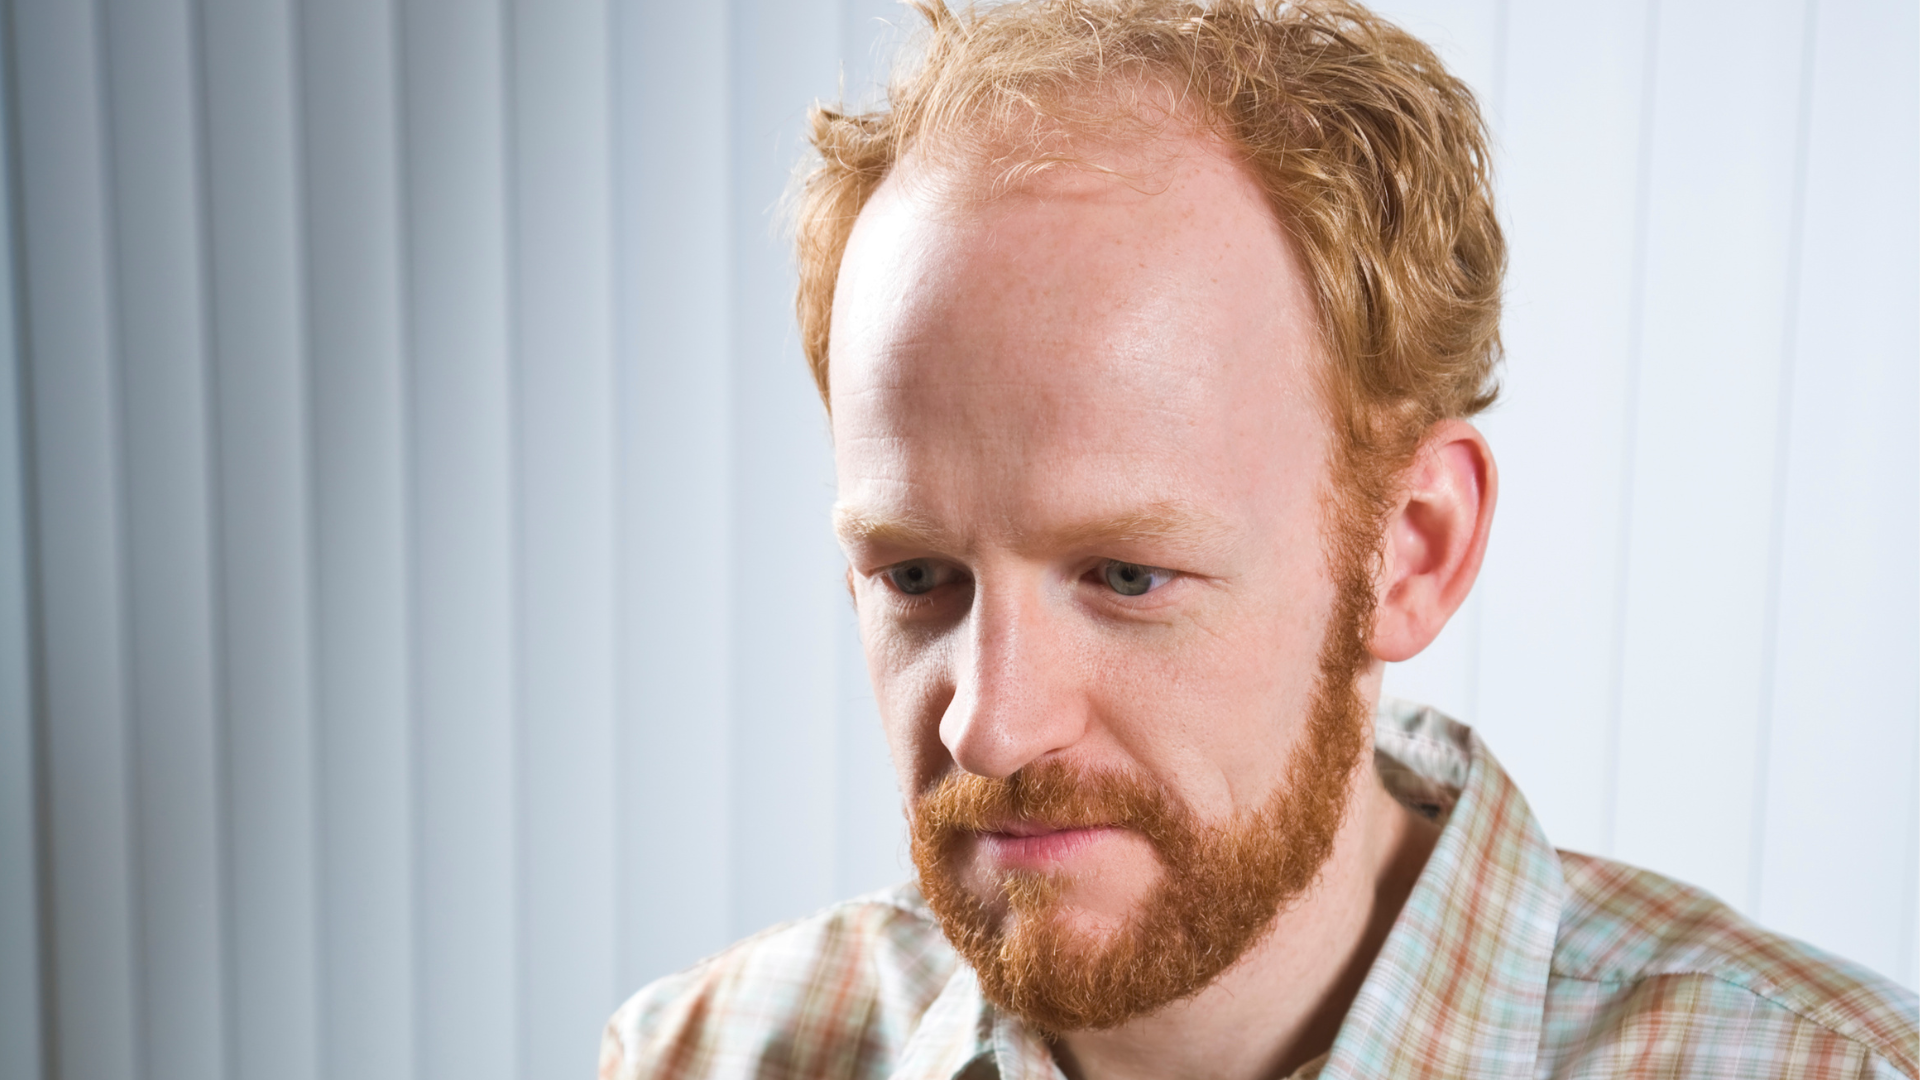 Redhead Men, Here’s Are 5 Game Plans If You’re Dealing With Hair Loss